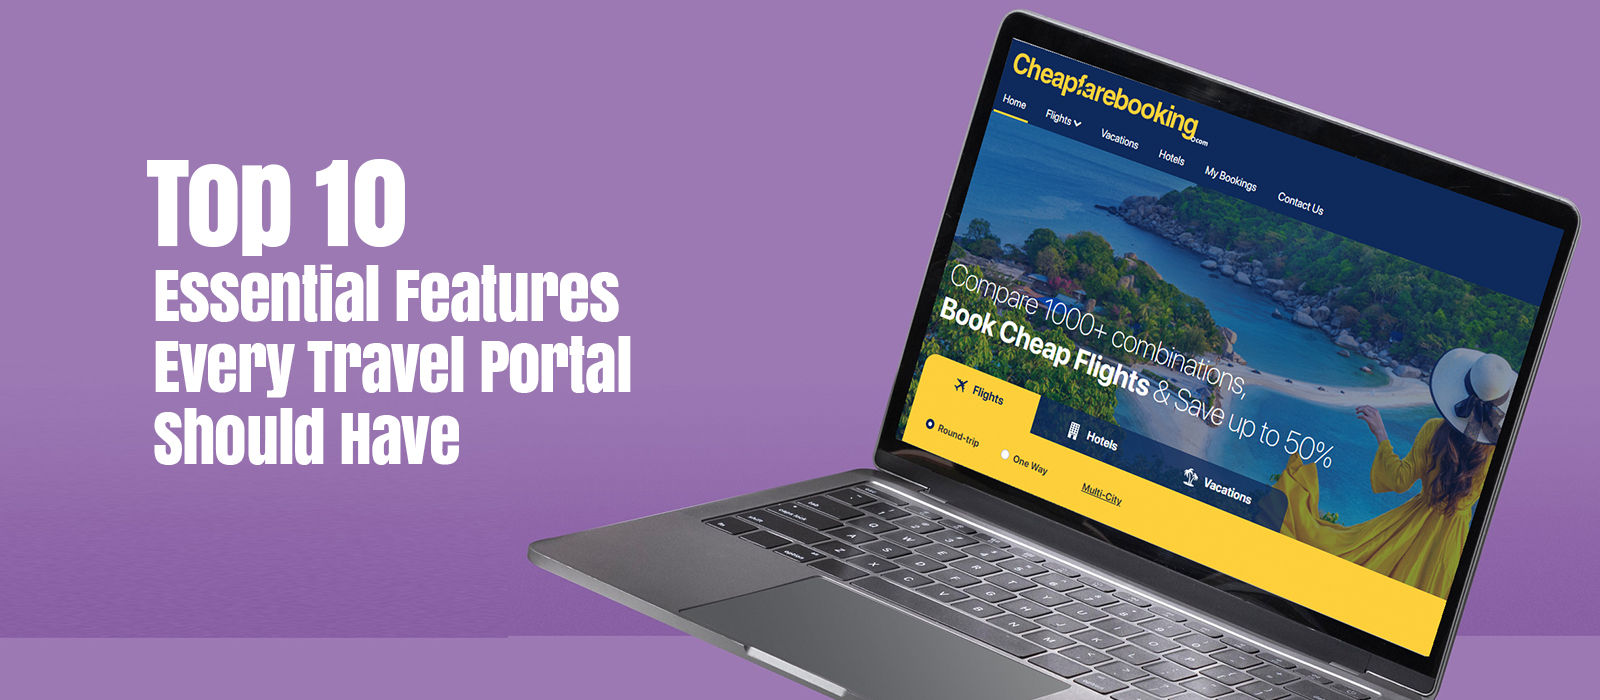 Top 10 Essential Features Every Travel Portal Should Have